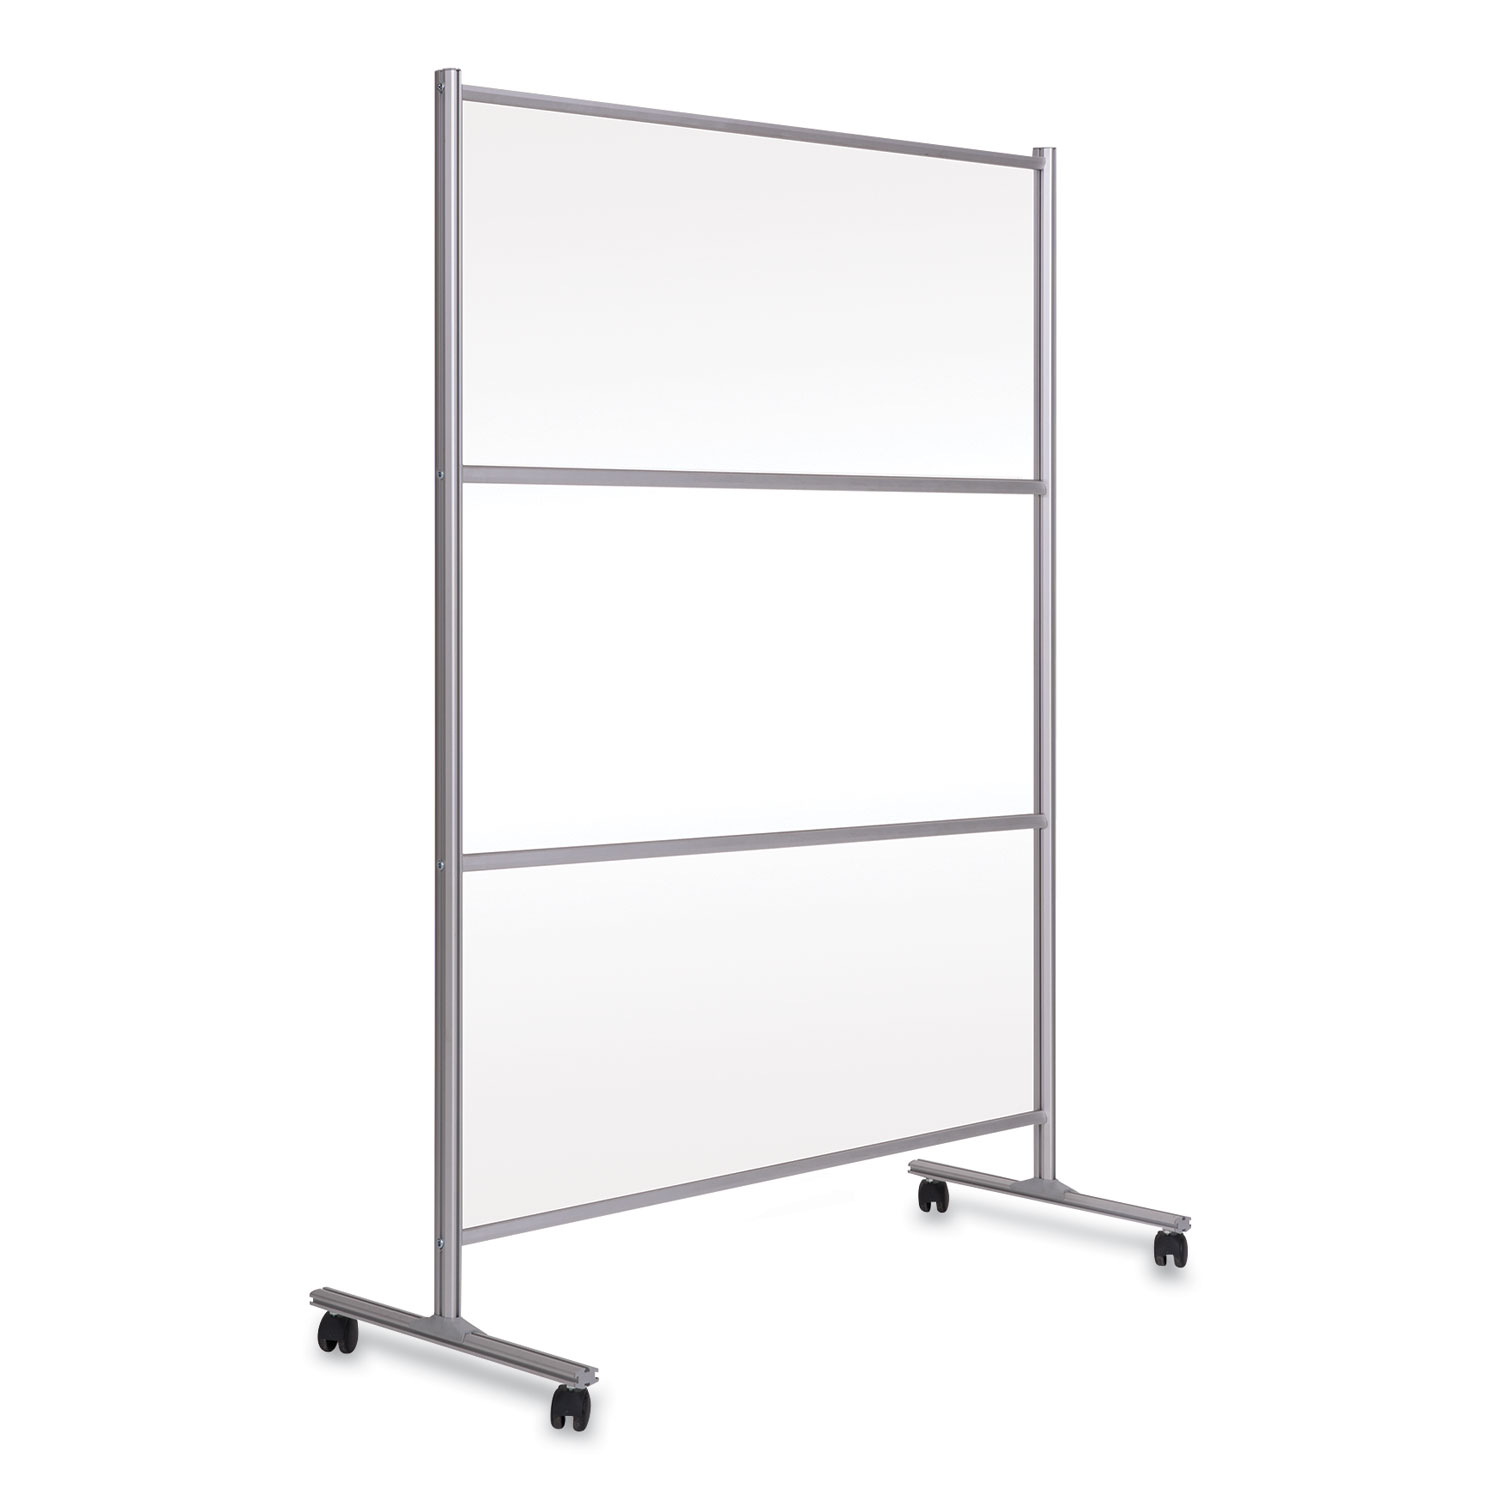  MasterVision DSP123046 Protector Series Mobile Glass Panel Divider, 68.5 x 22 x 50, Clear/Aluminum (BVCDSP123046) 